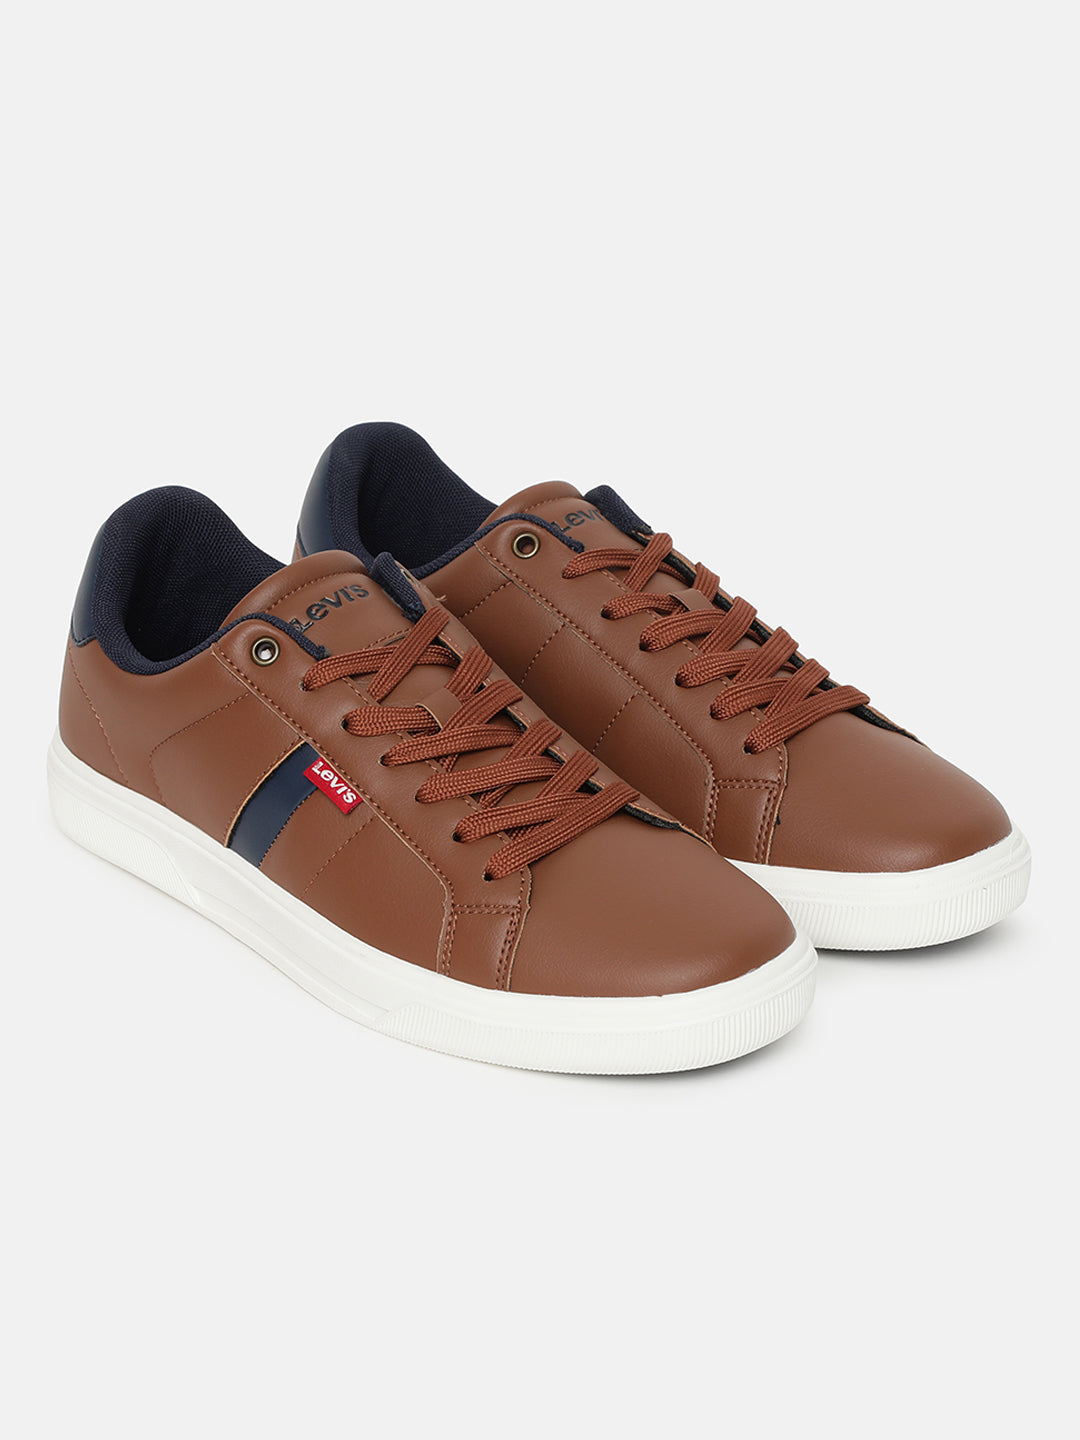 Odsy 1000 Luxury Designer Allbirds Sneakers For Men And Women Breathable,  Stitched, And Comfortable With New Decorated Arrow Design Leather001 From  Lsvsbag, $76.27 | DHgate.Com